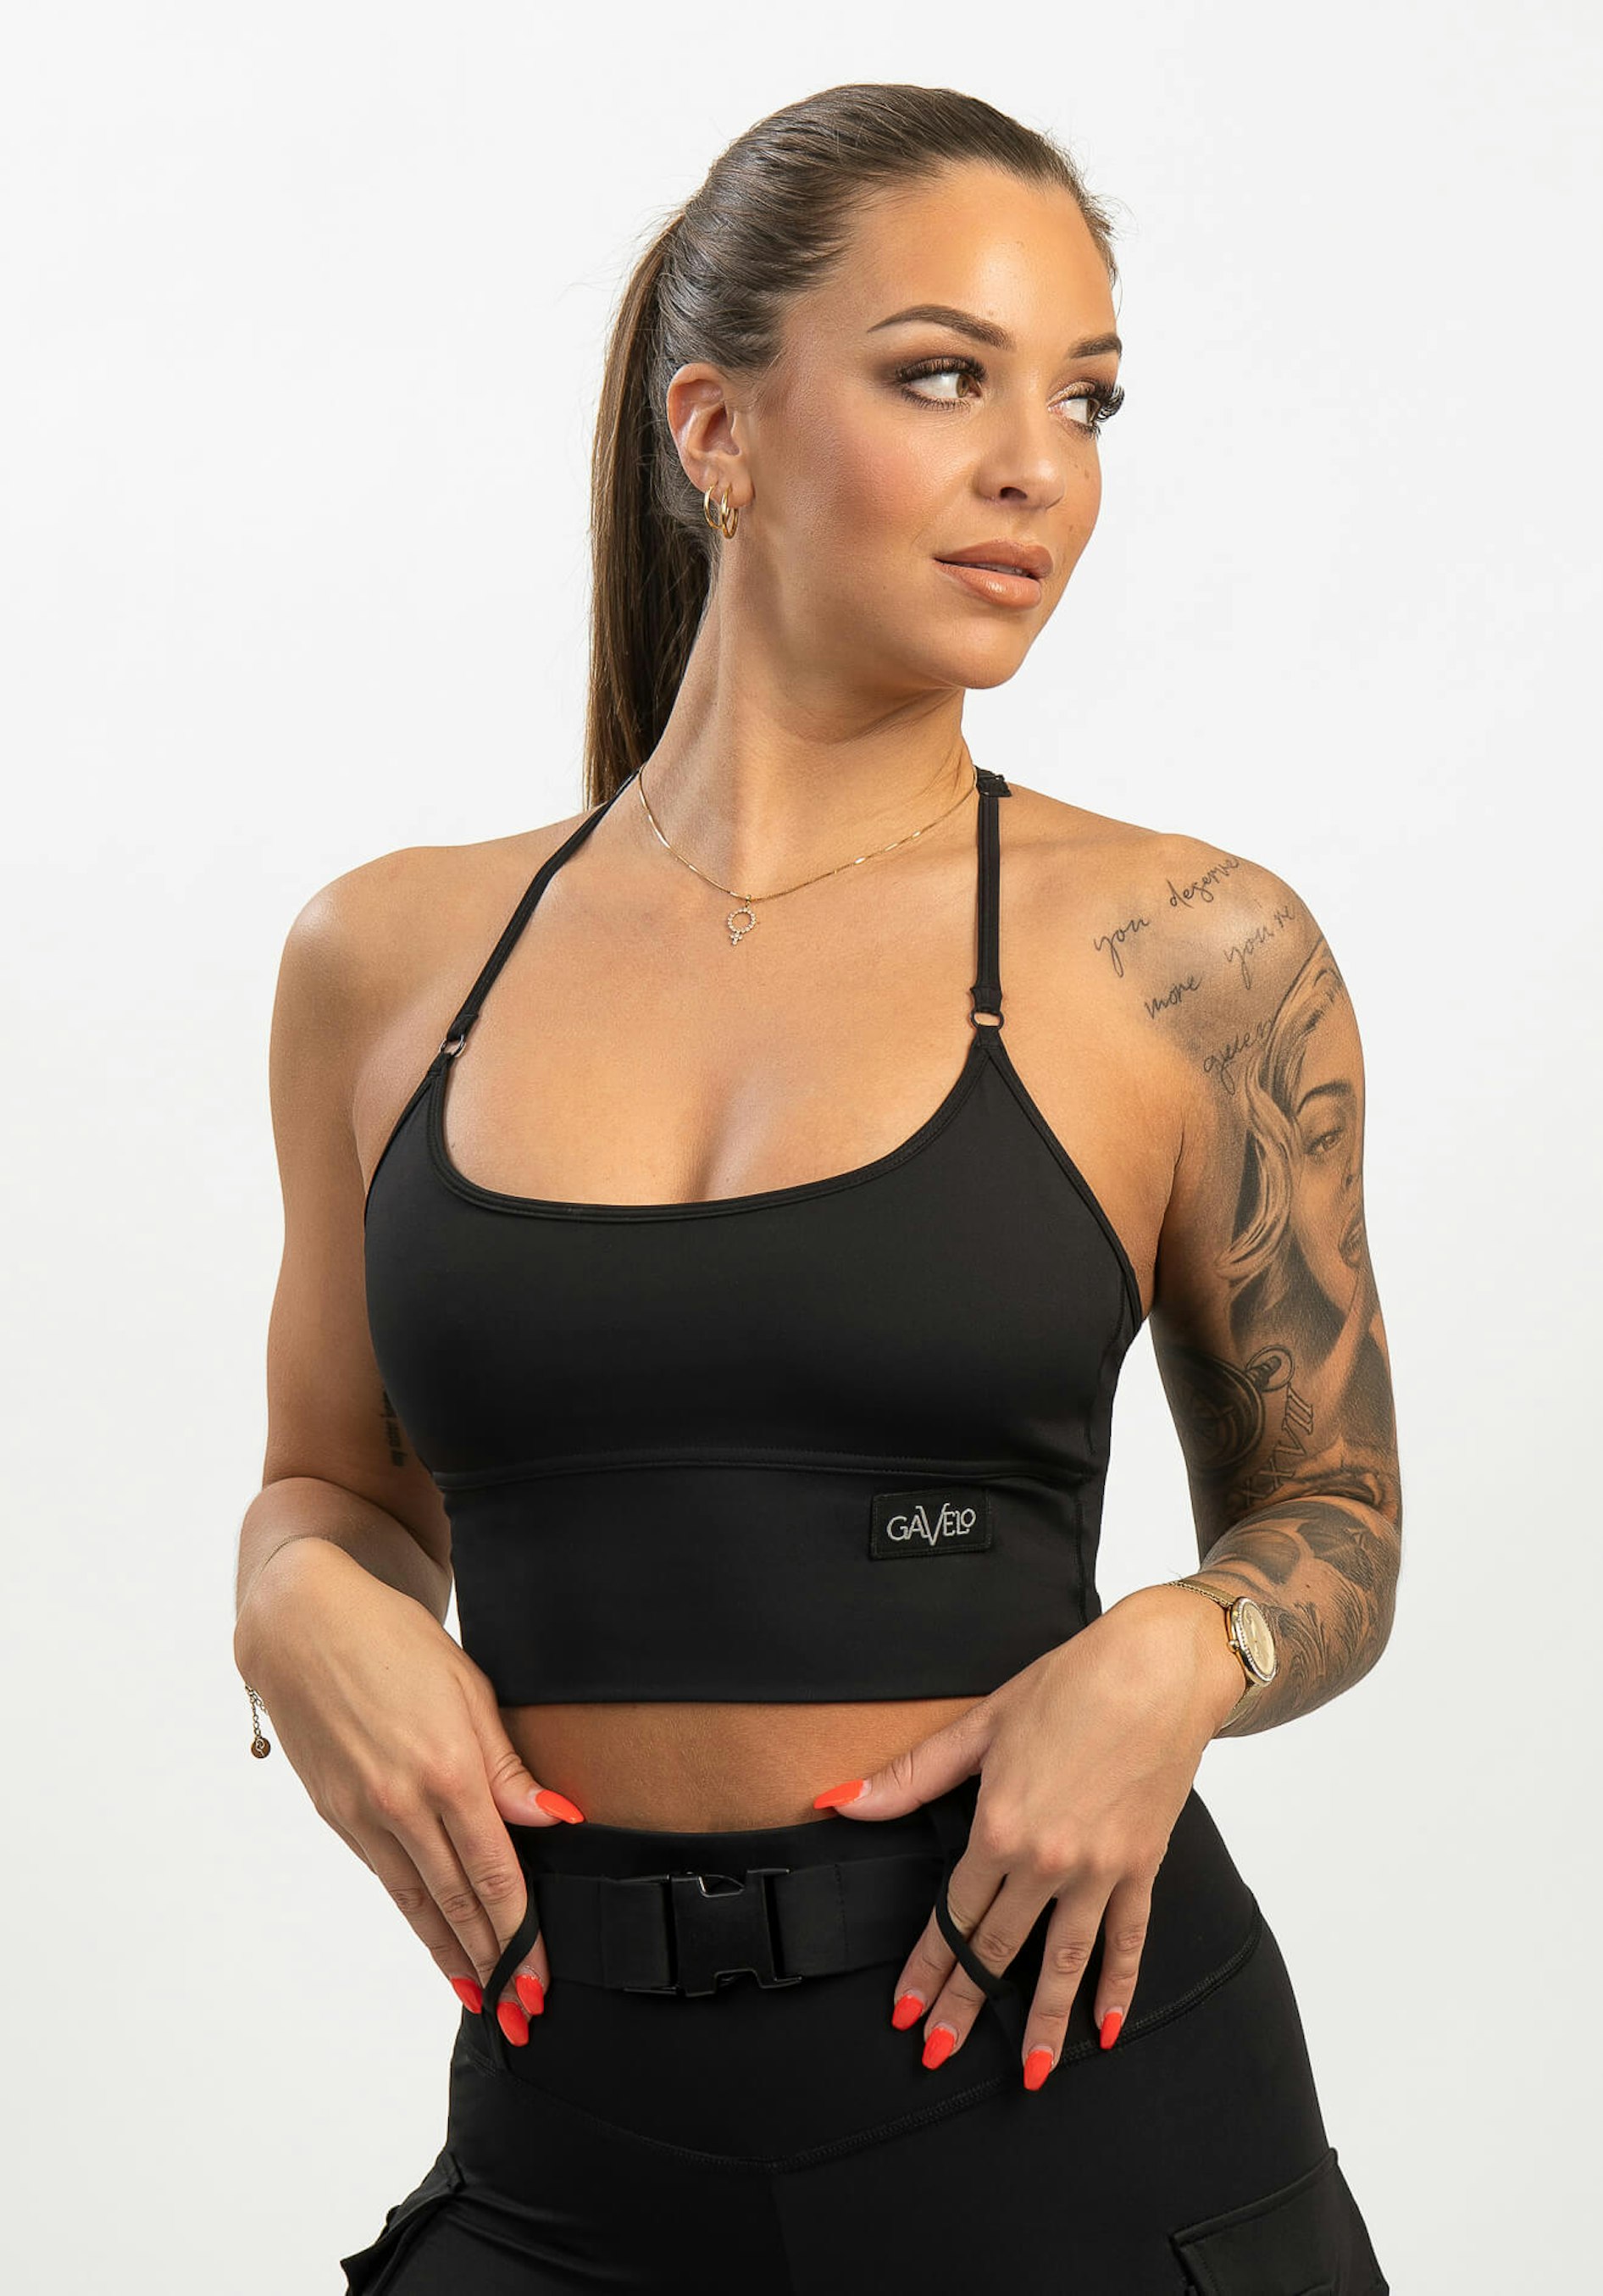 Gavelo  Fitness clothes for men and women